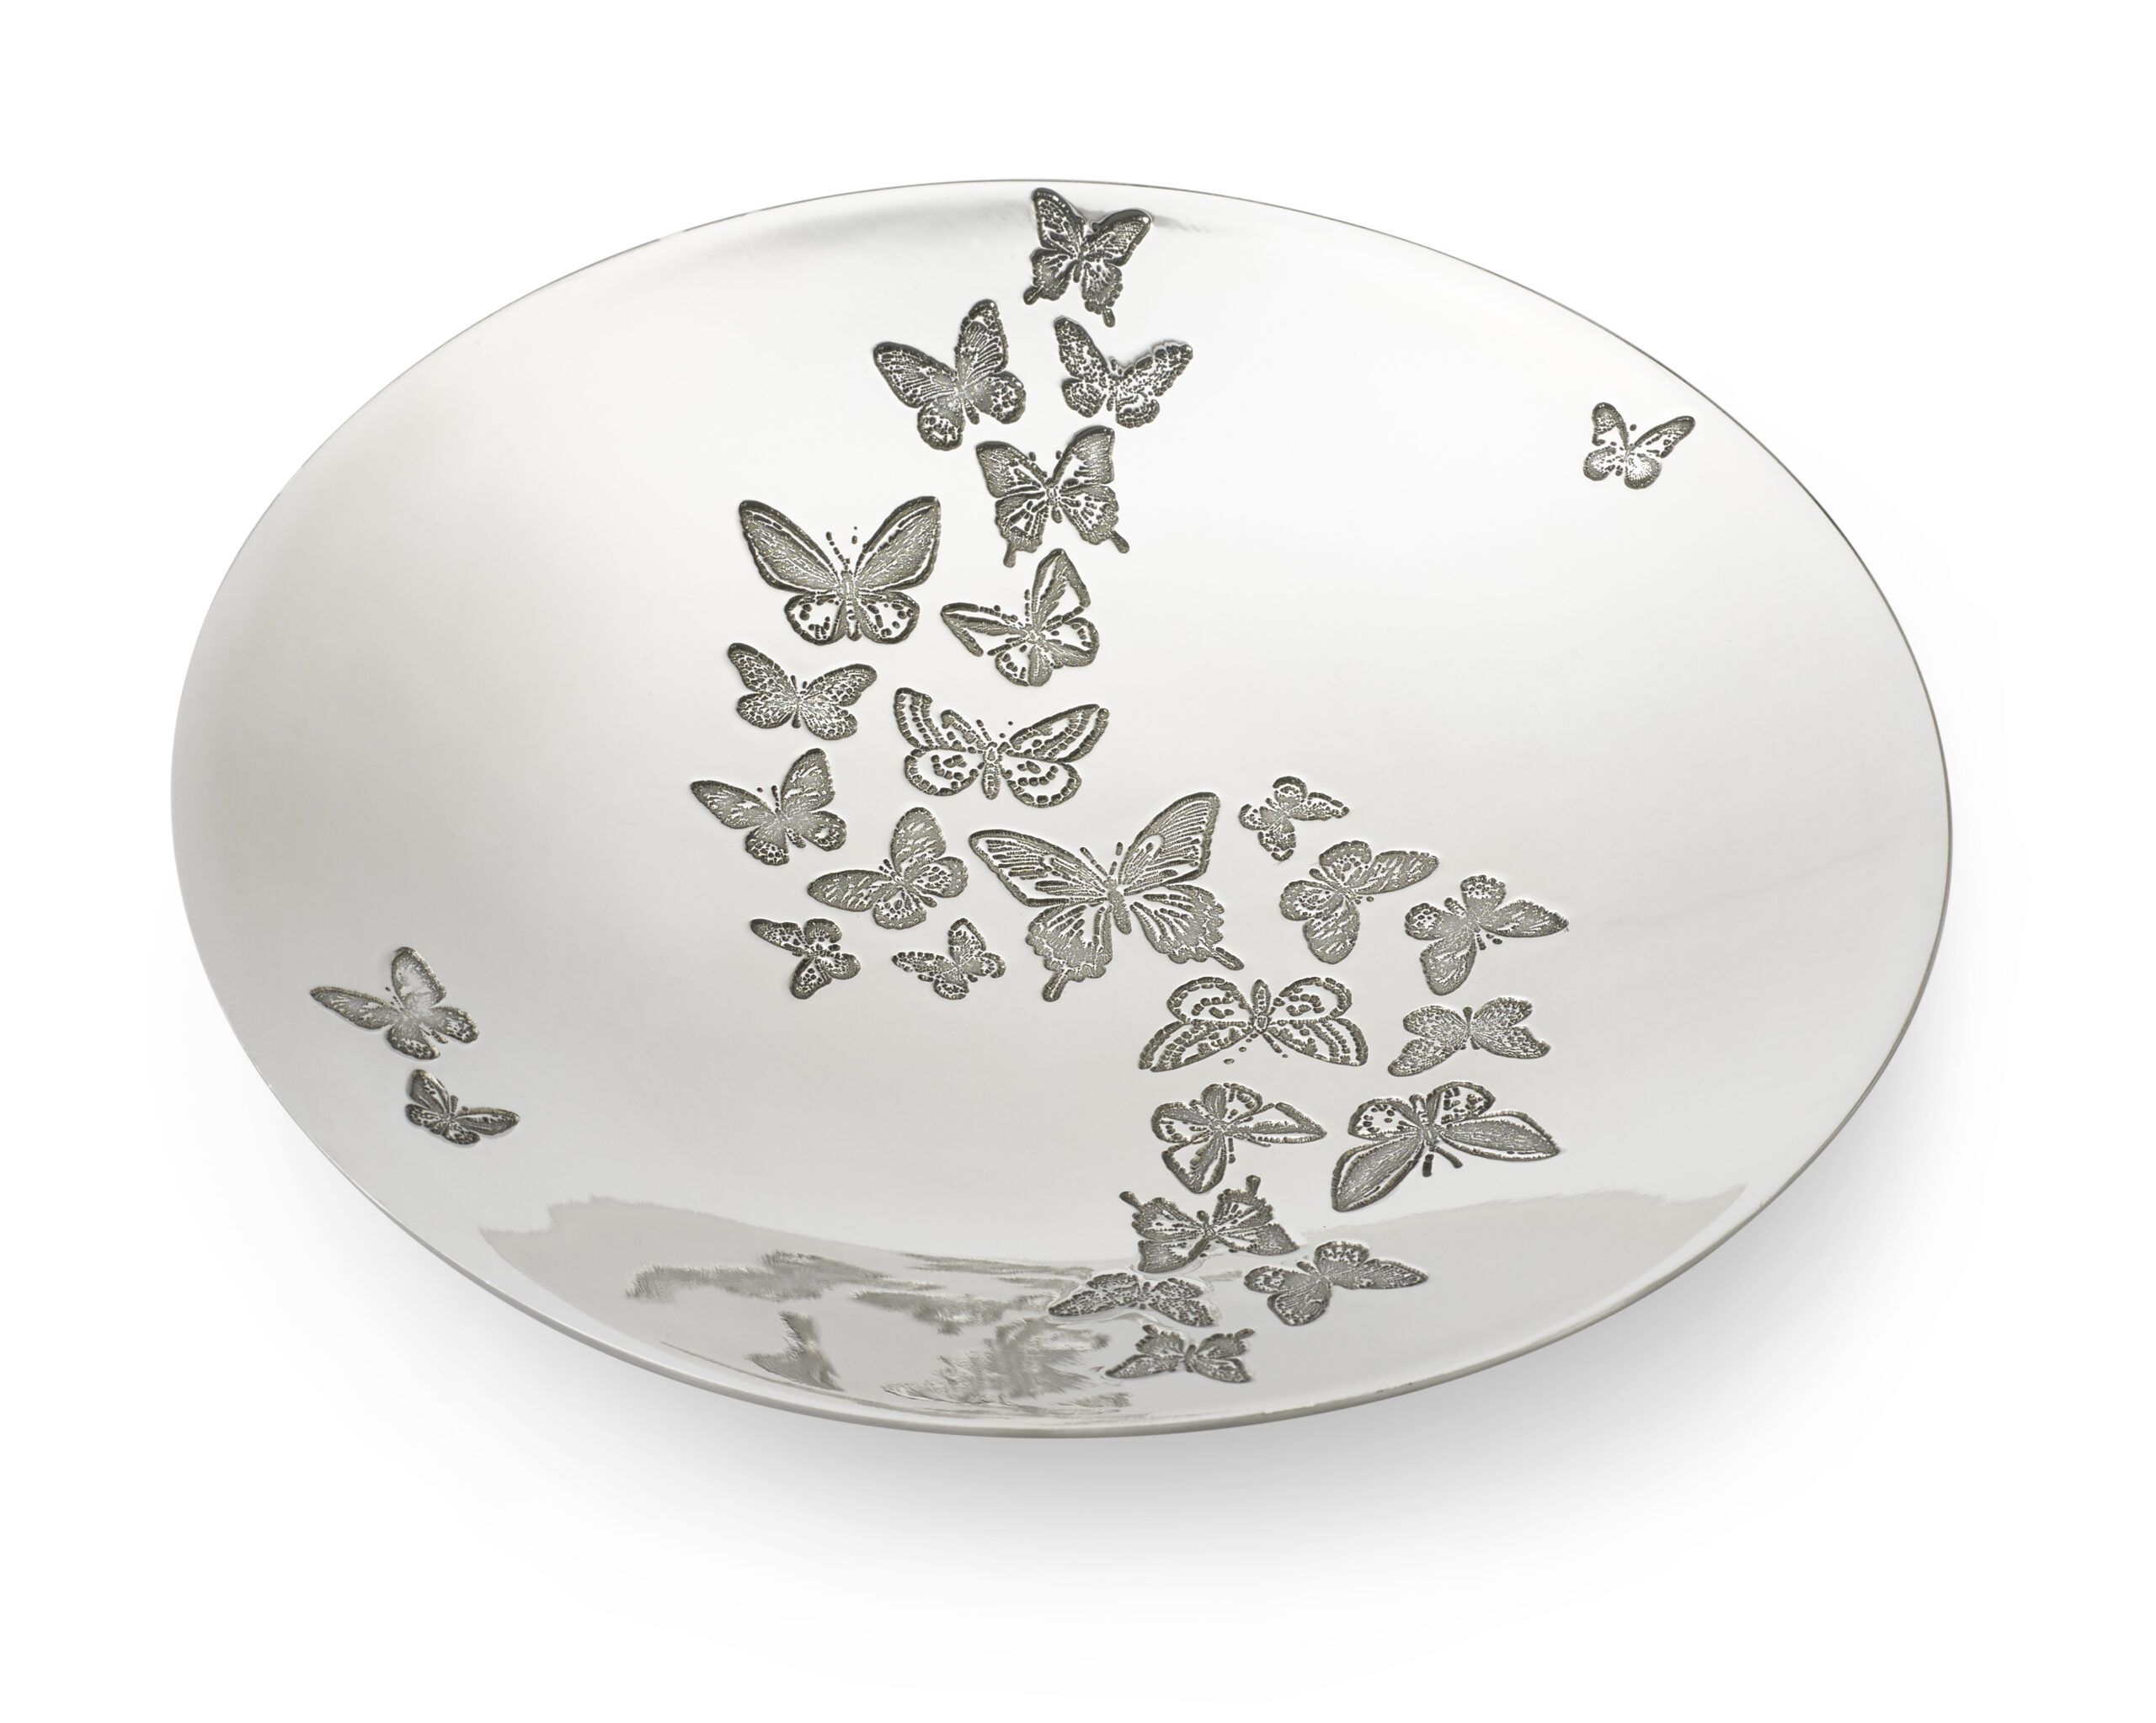 https://www.pewter.co.uk/wp-content/uploads/2021/06/Wentworth-Butterflies89928-scaled.jpg